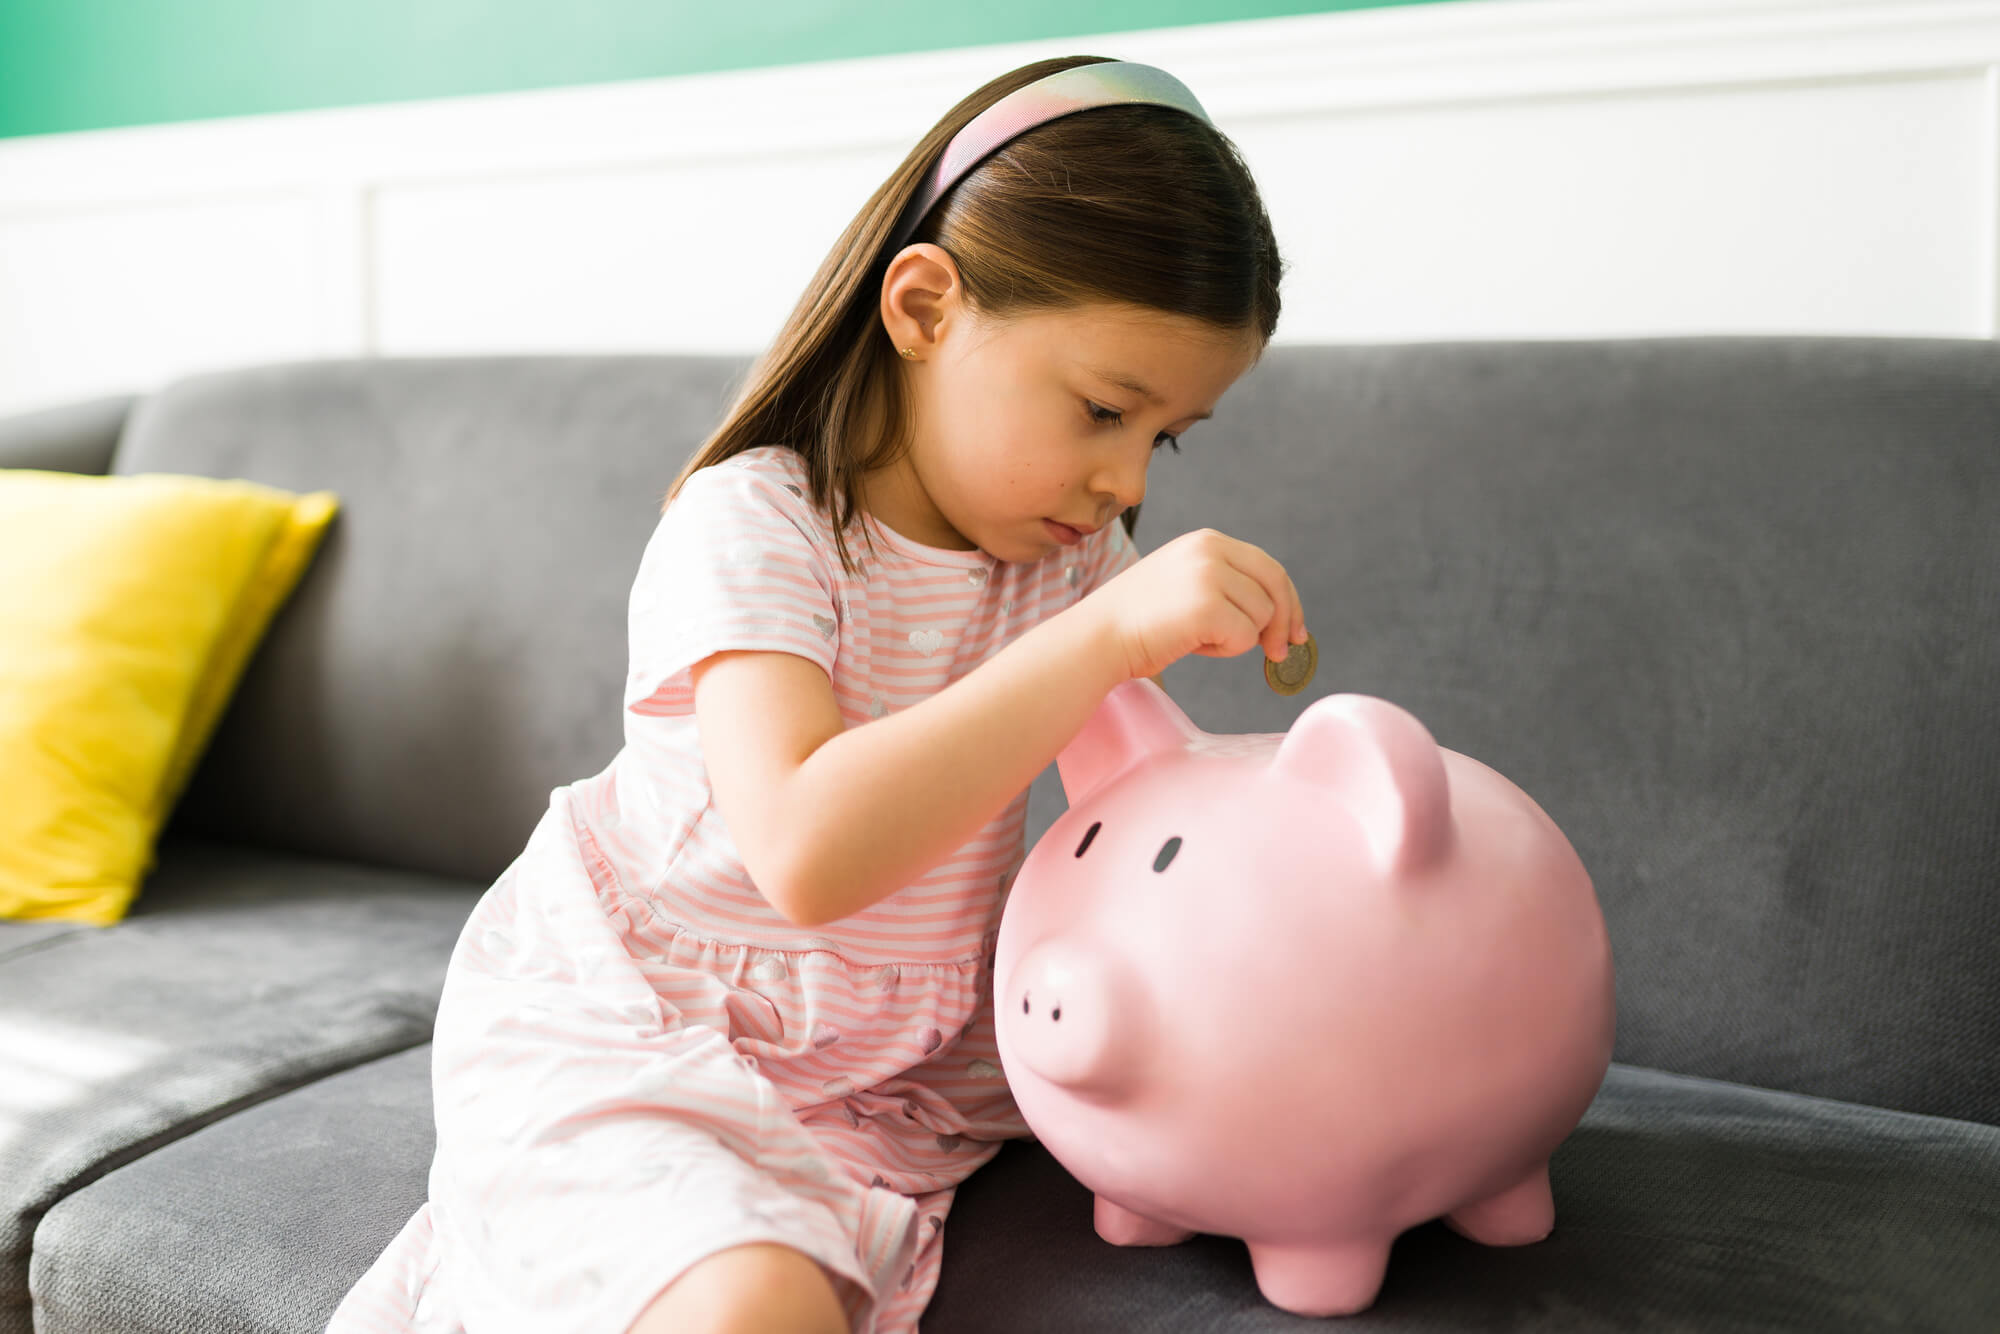 Small child learning how to save money with a piggy bank